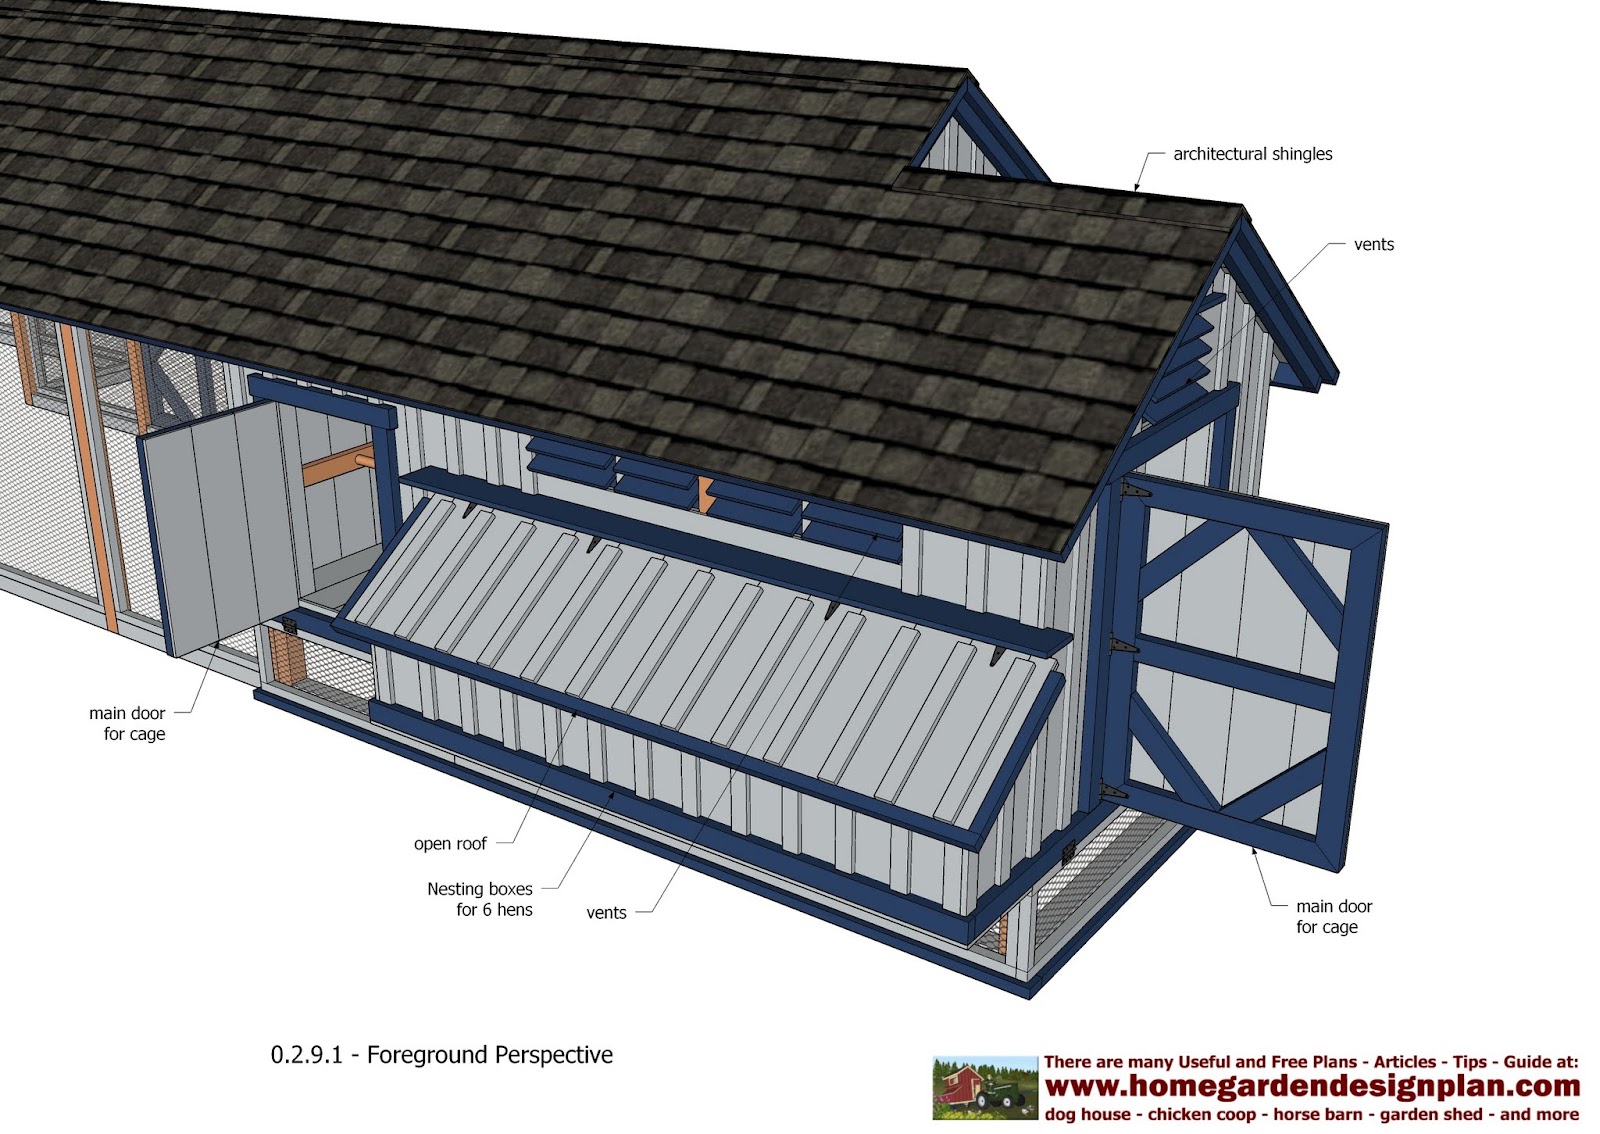 L200 - Large Chicken Coop Plans - How to Build a Chicken Coop ...